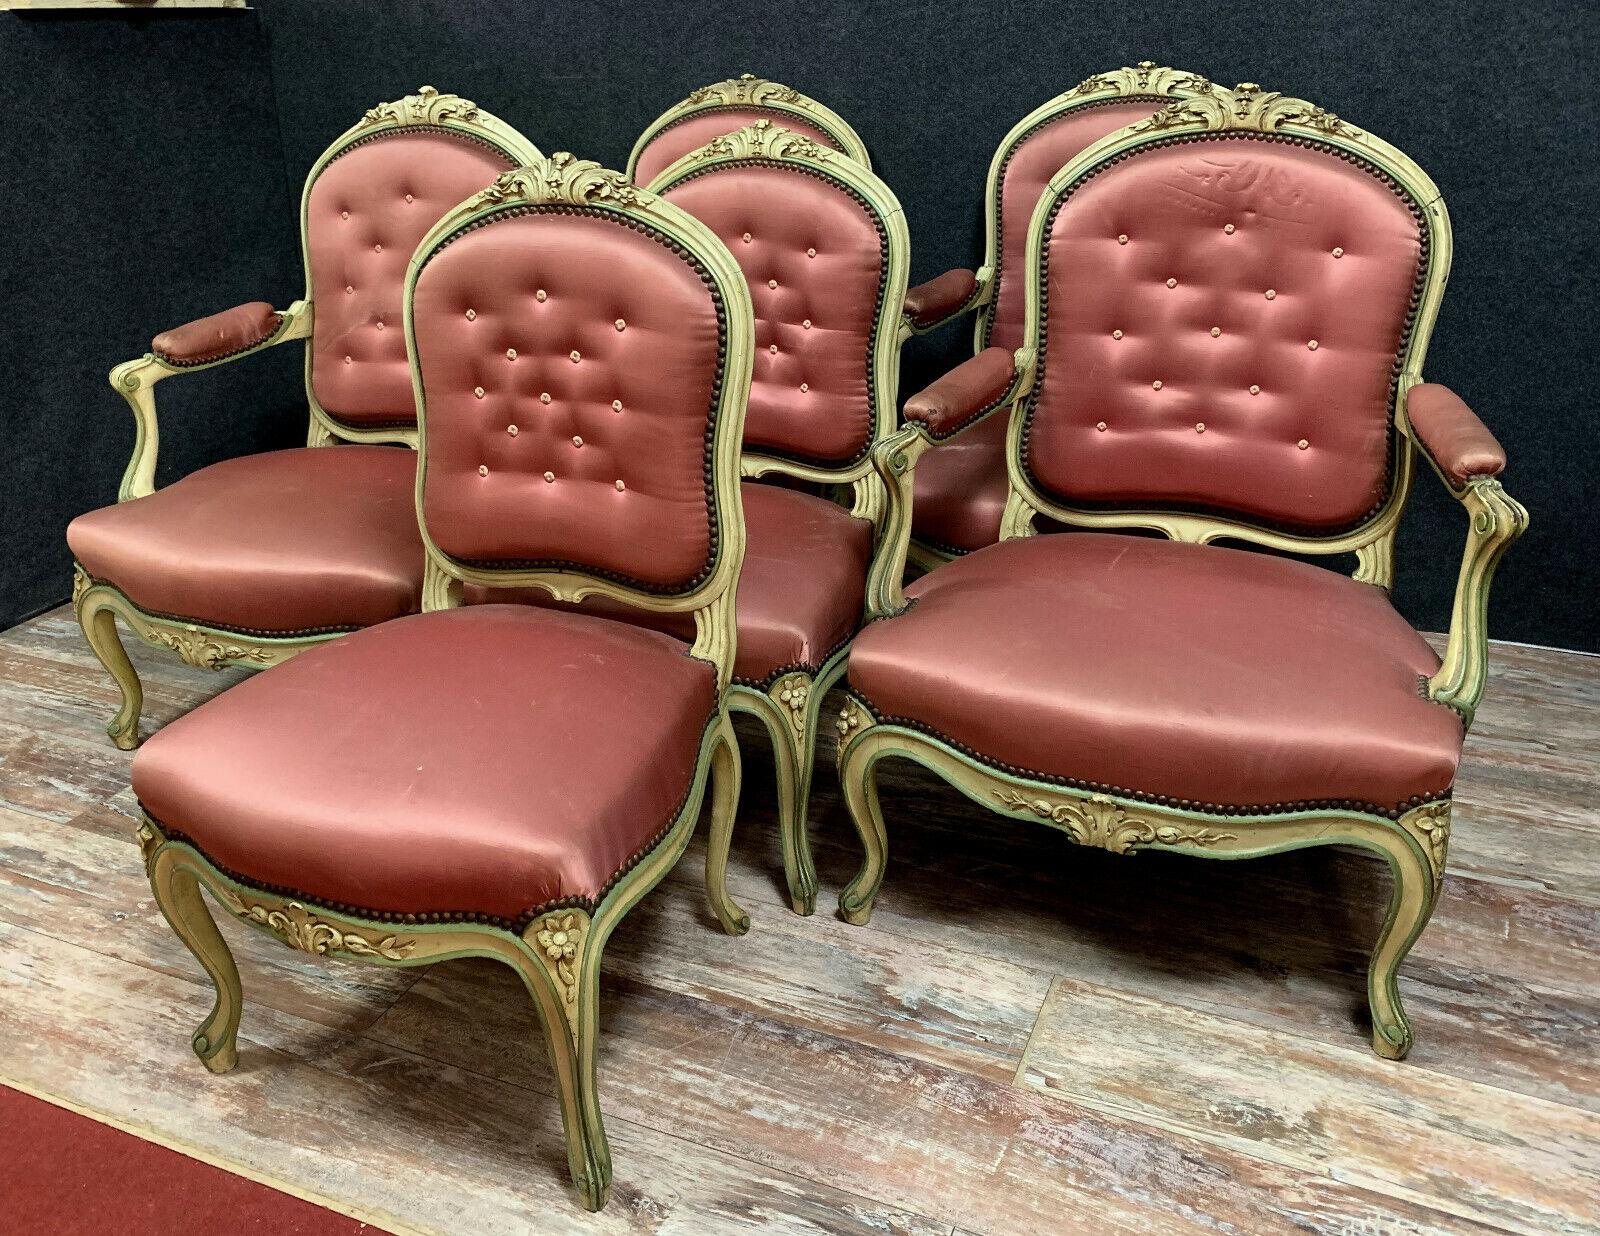 Louis XV Lacquered Wood Salon Furniture Set with 4 Armchairs and 2 Chairs -1X01 For Sale 2